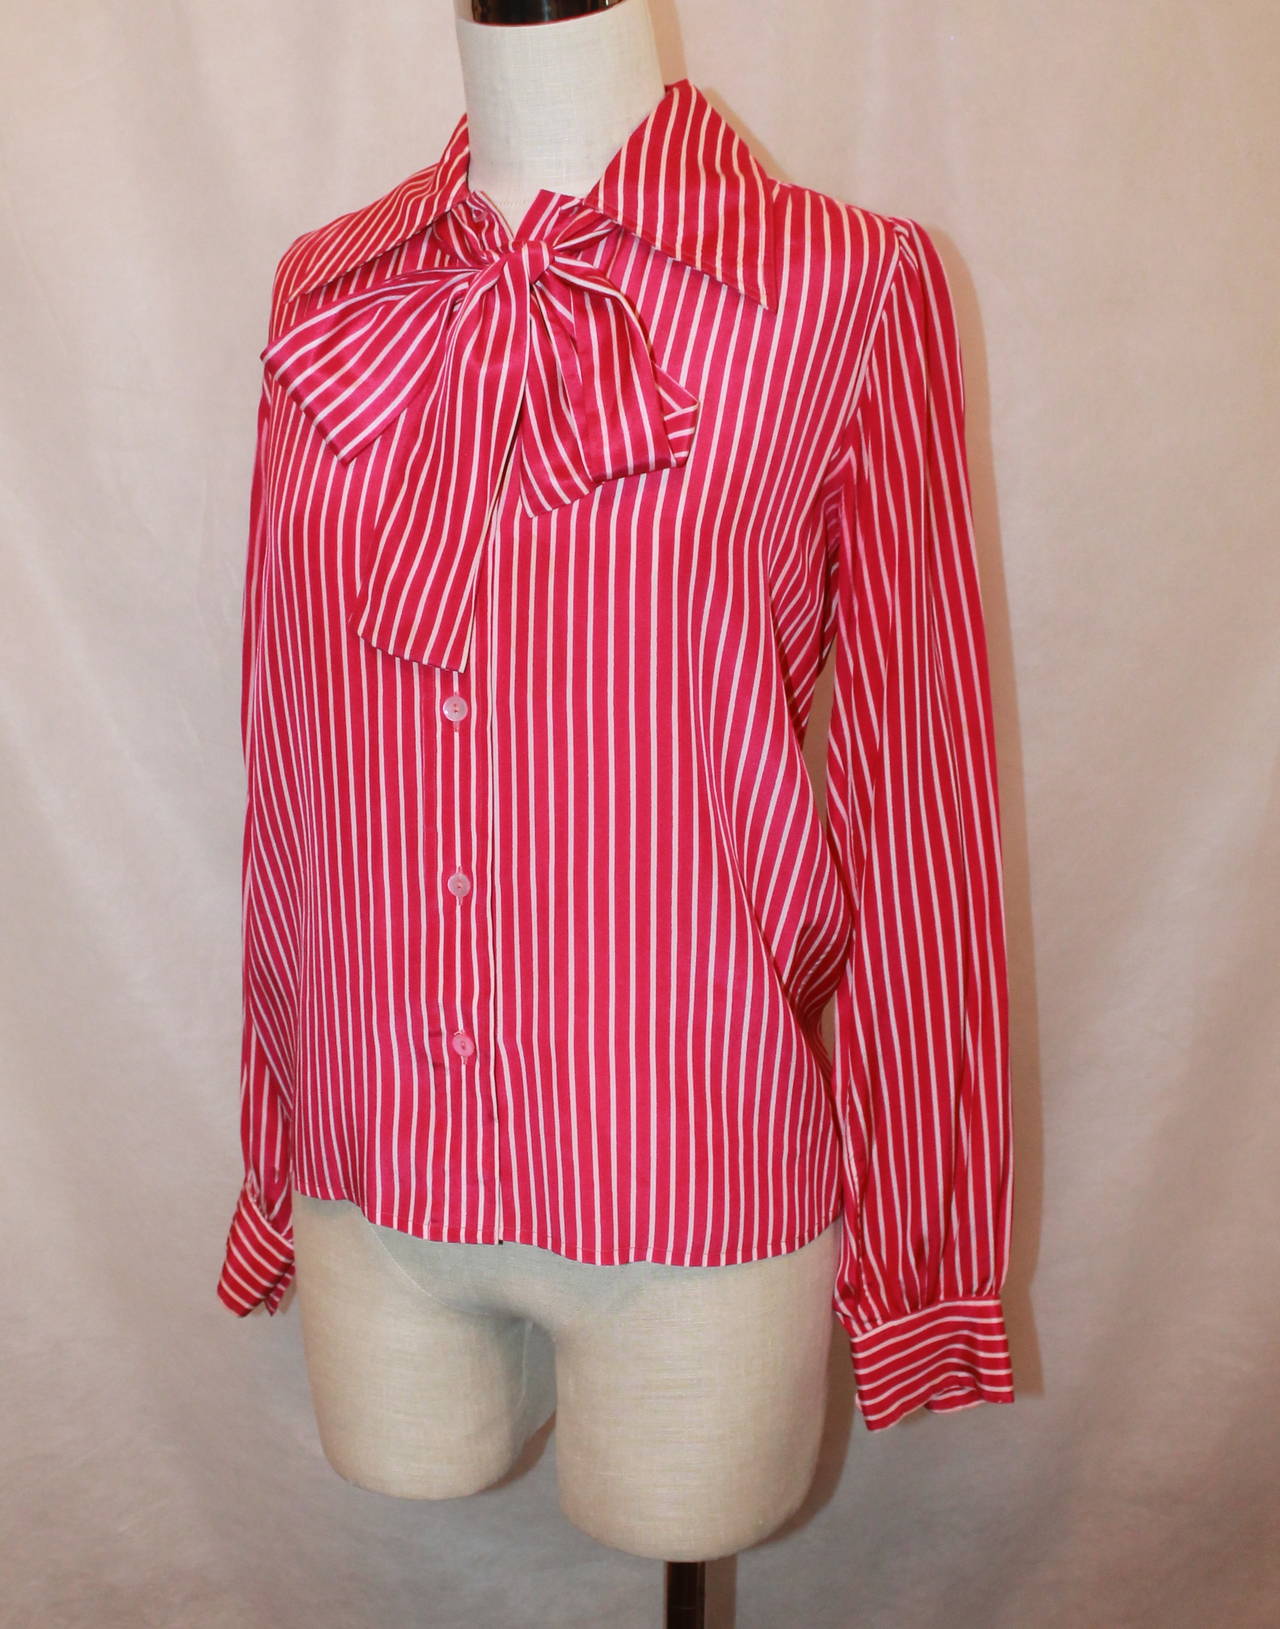 YSL 1960's Vintage Fuchsia & White Striped Long Sleeve Blouse - 38. This blouse is in very good vintage condition and has a removable neck tie that can also be used as a belt. The only issue is that the stripes on the underarms that were white have